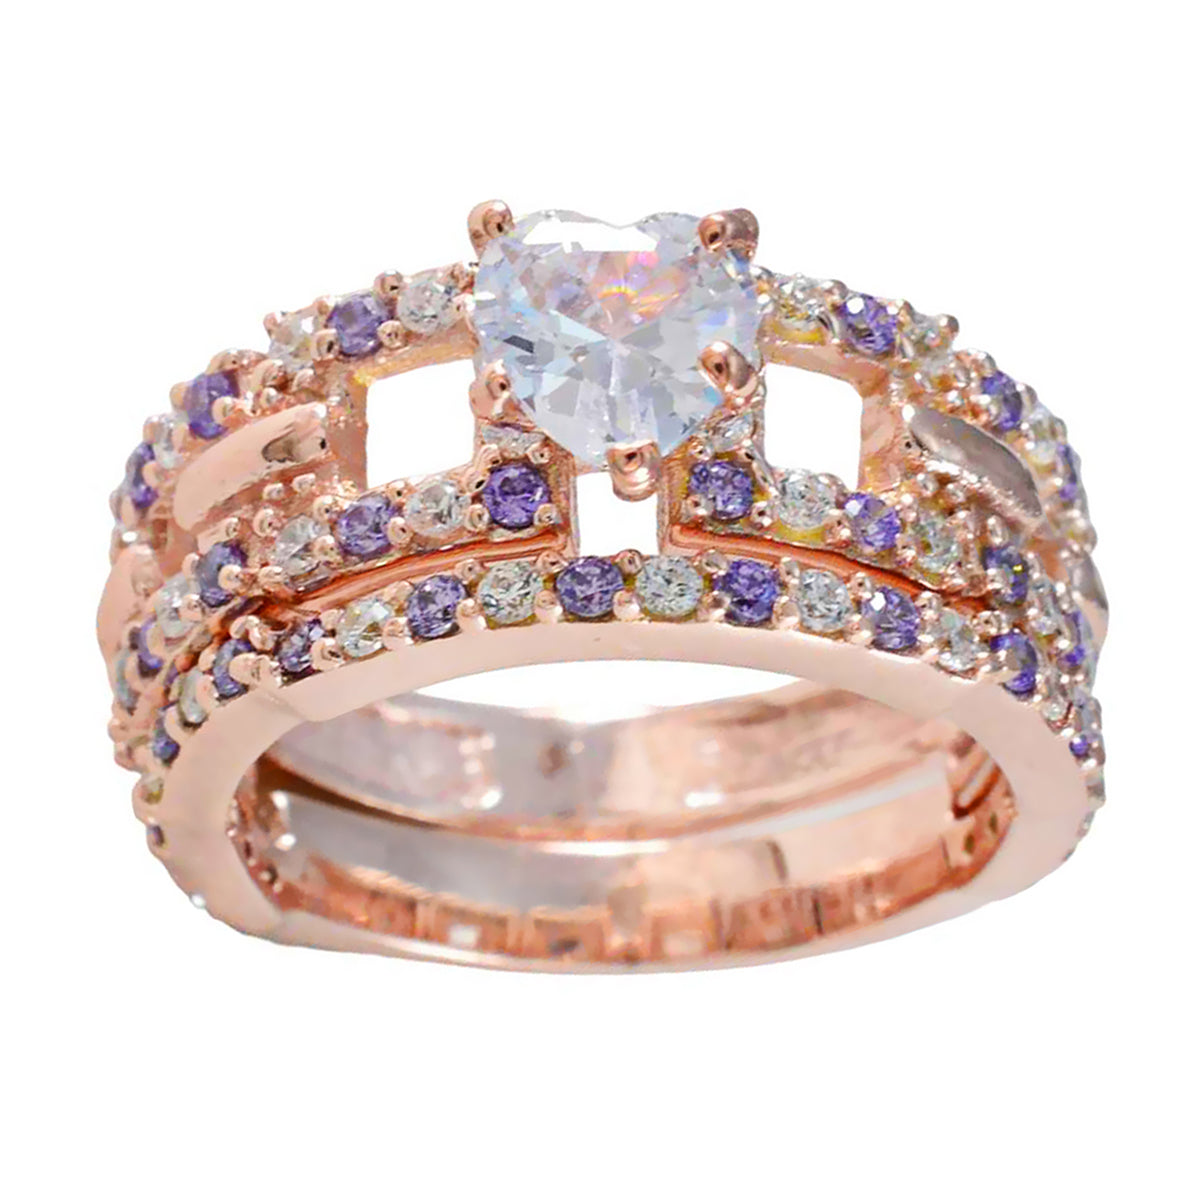 Riyo Overall Silver Ring With Rose Gold Plating Amethyst Stone Heart Shape Prong Setting Designer Jewelry Wedding Ring